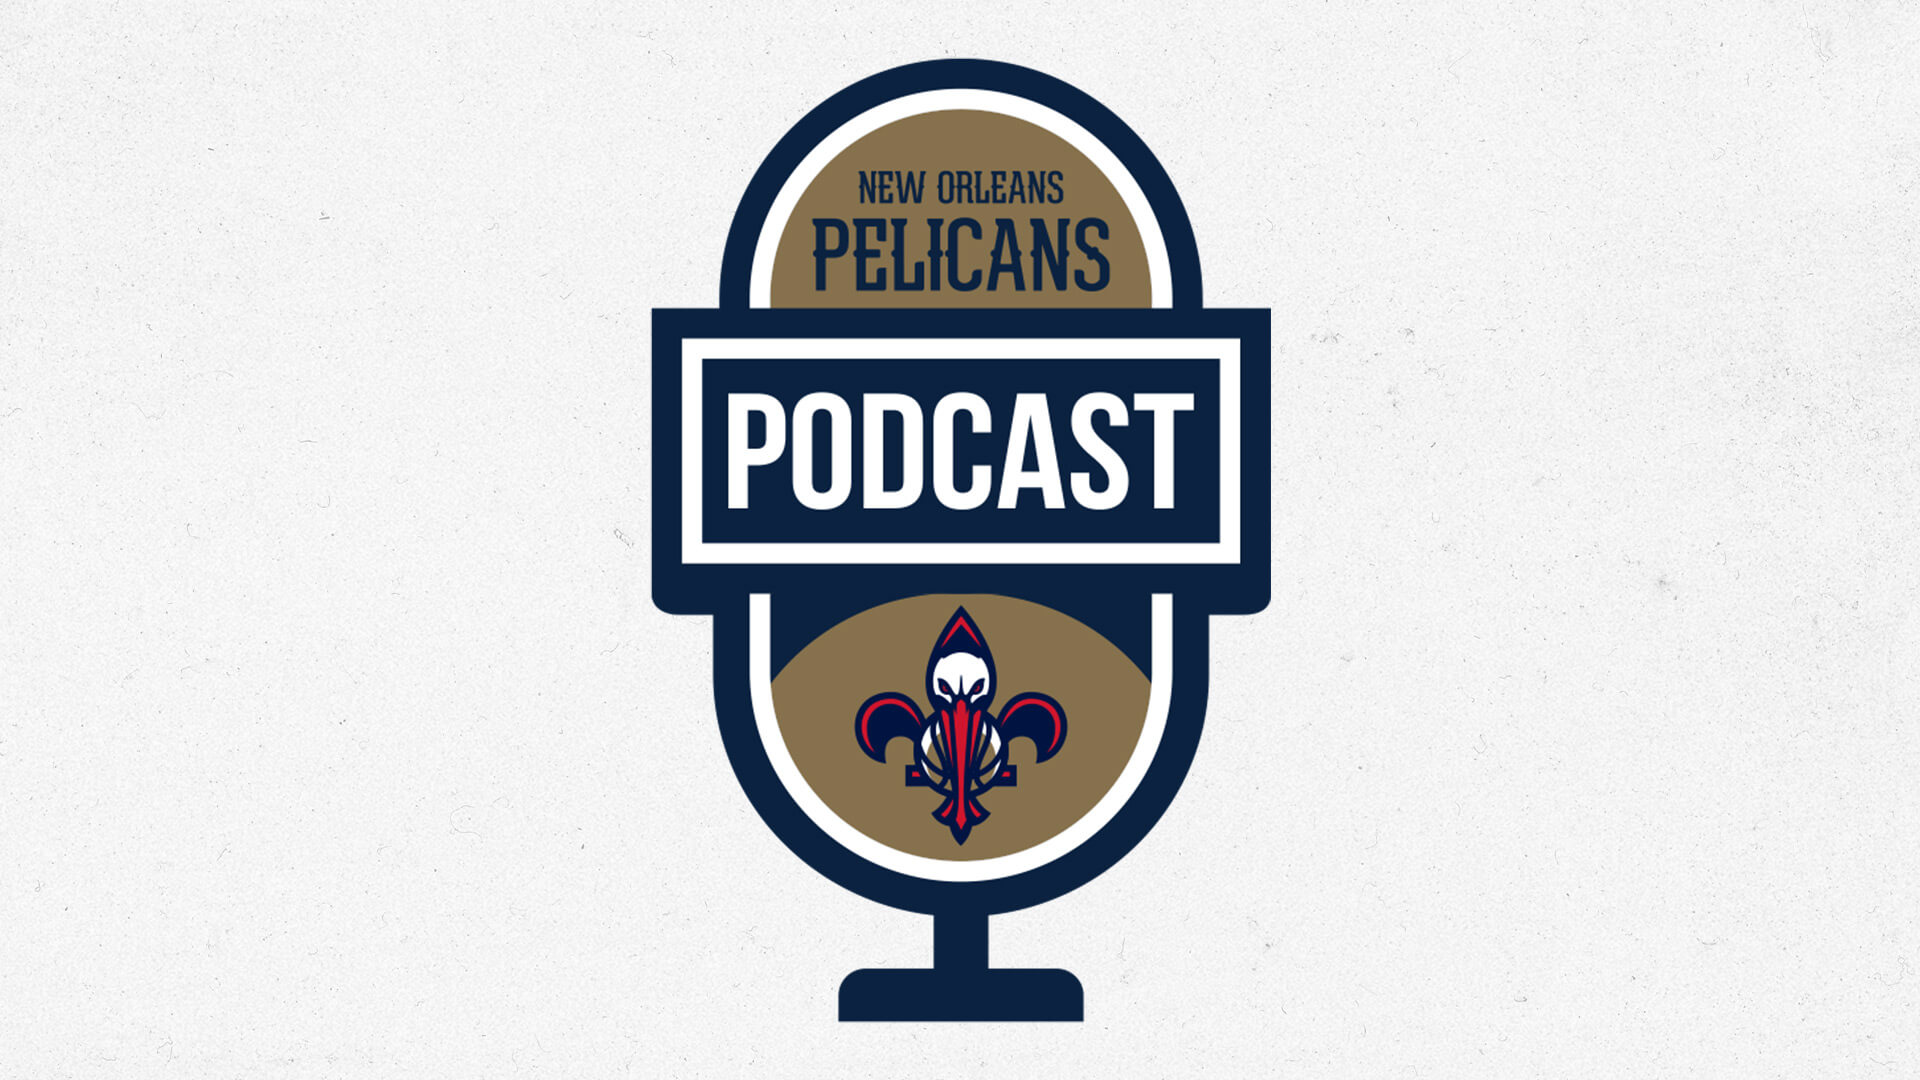 Gus Kattengell talks positives from tough Pelicans road trip, upcoming schedule | Pelicans Podcast